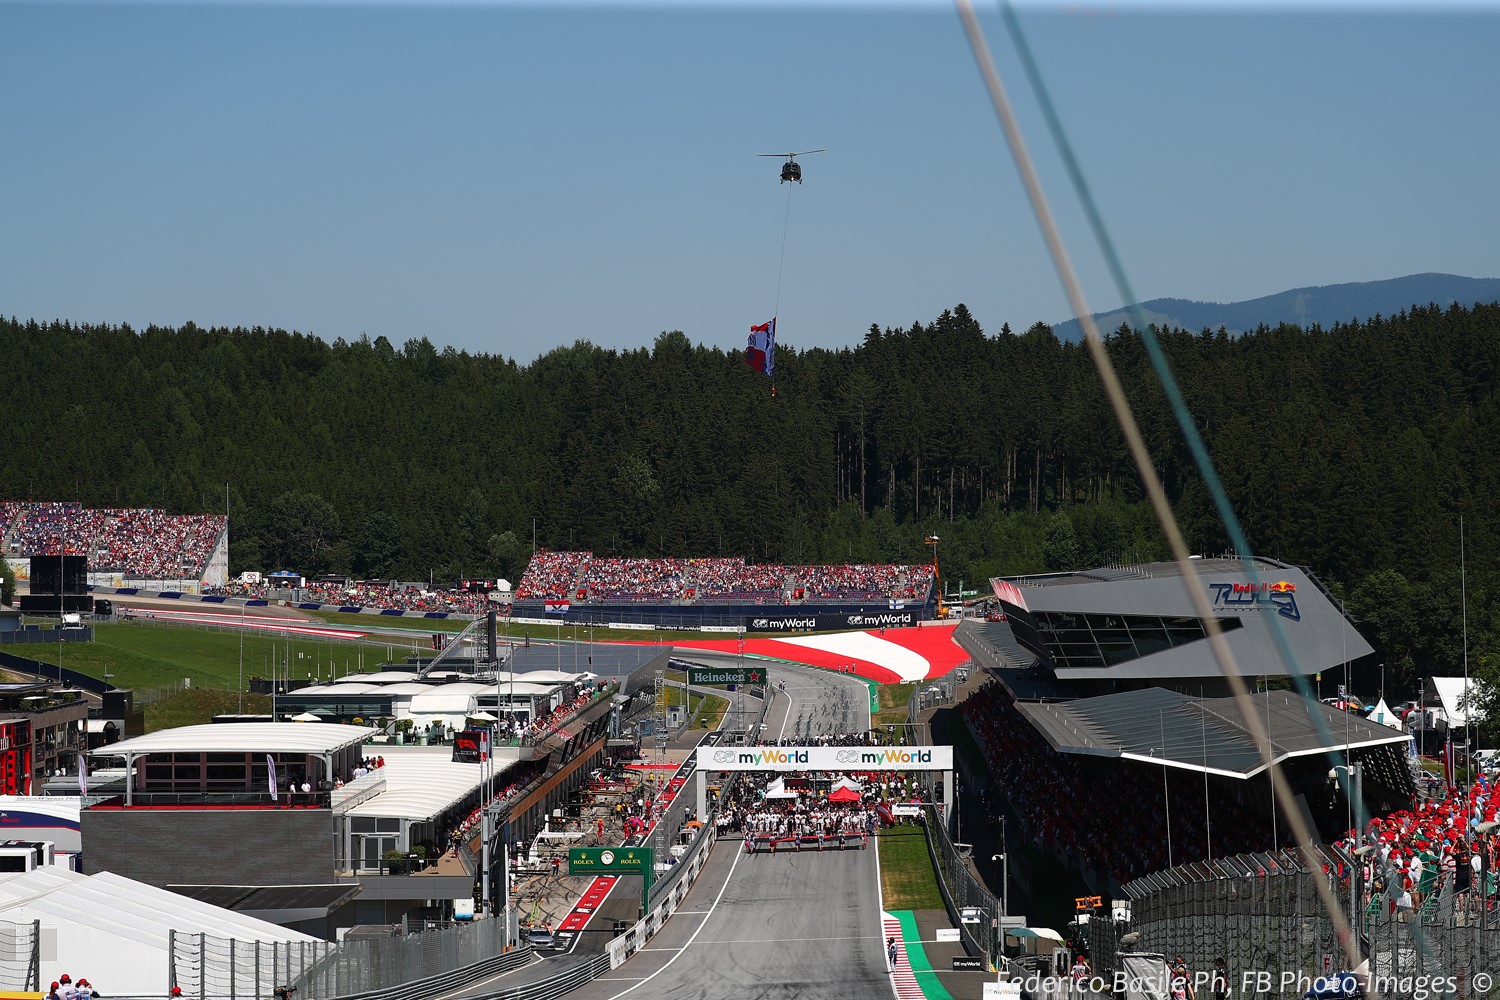 The Austrian government supports the race, but with zero fans. Some support, huh? Promoter will lose millions.